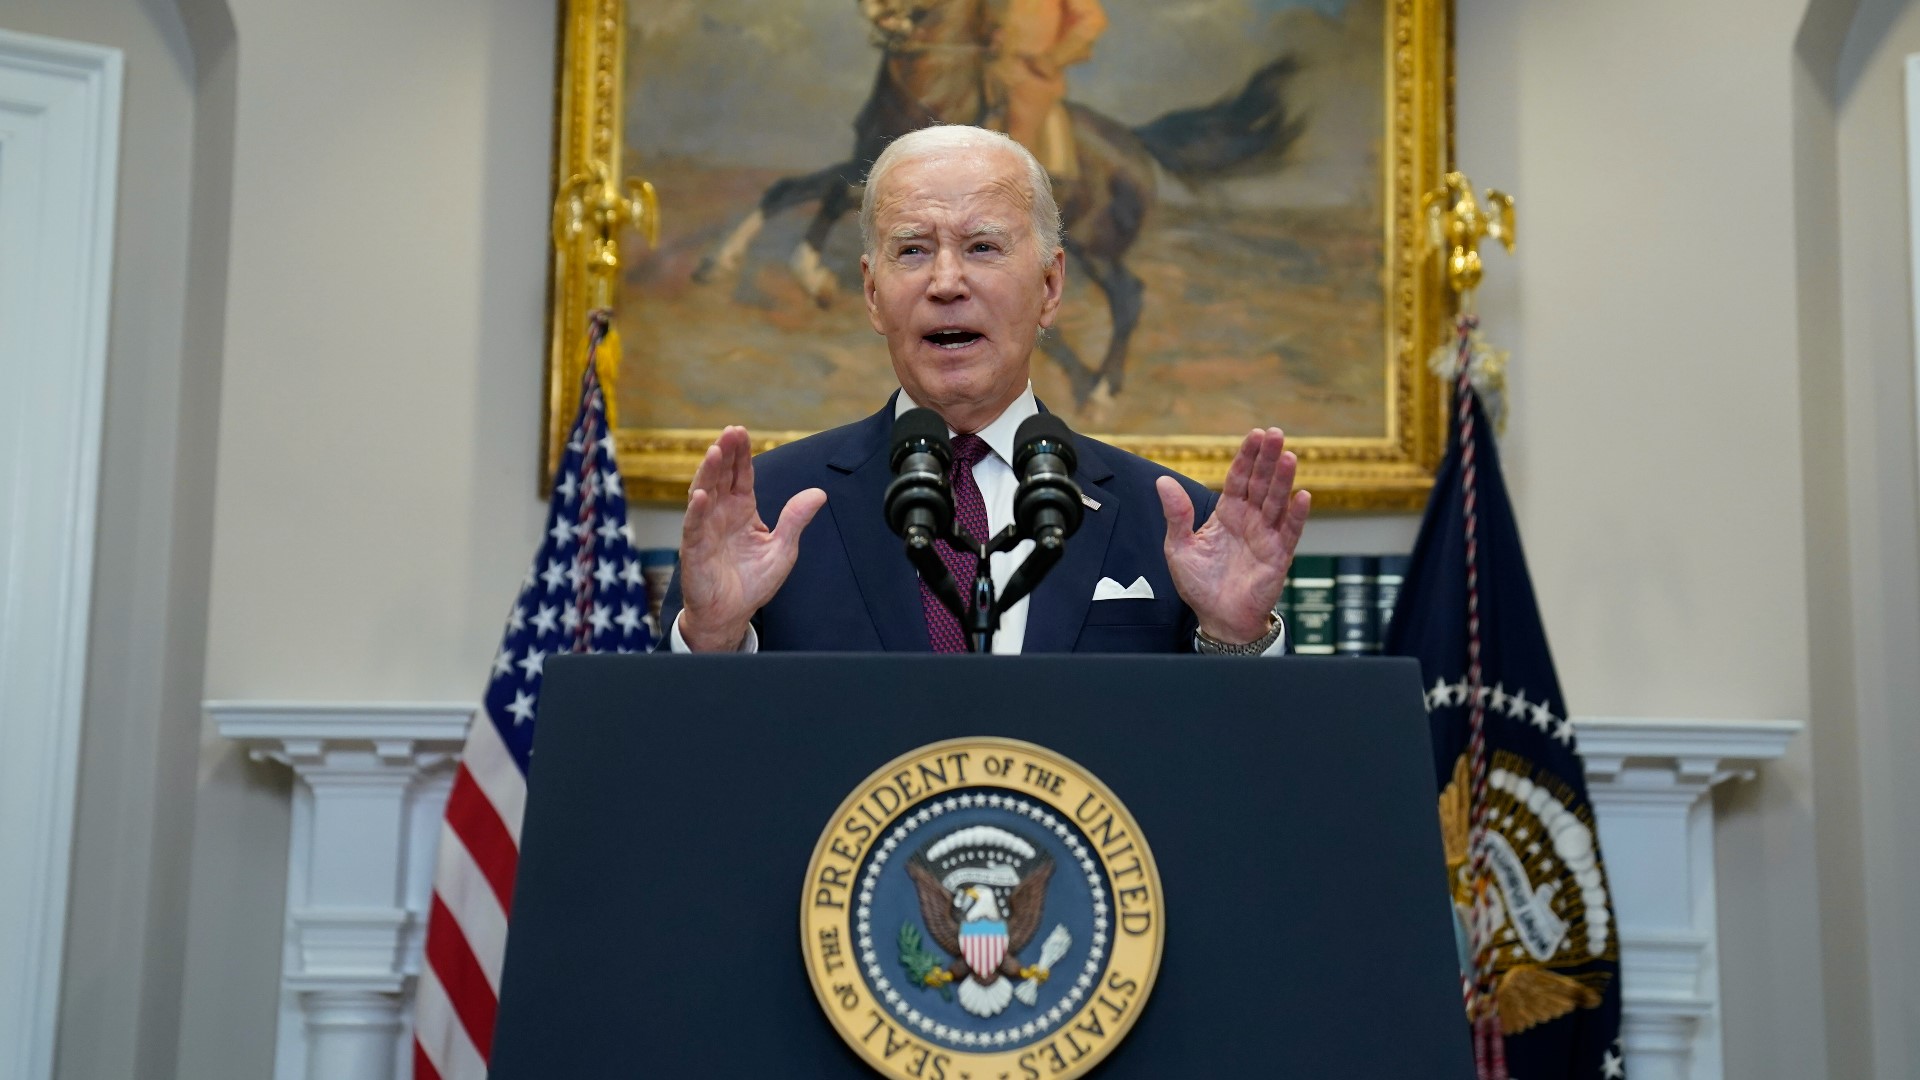 President Joe Biden responded to the Supreme Court's ruling on affirmative action which effectively overturned the consideration of race in college admissions.